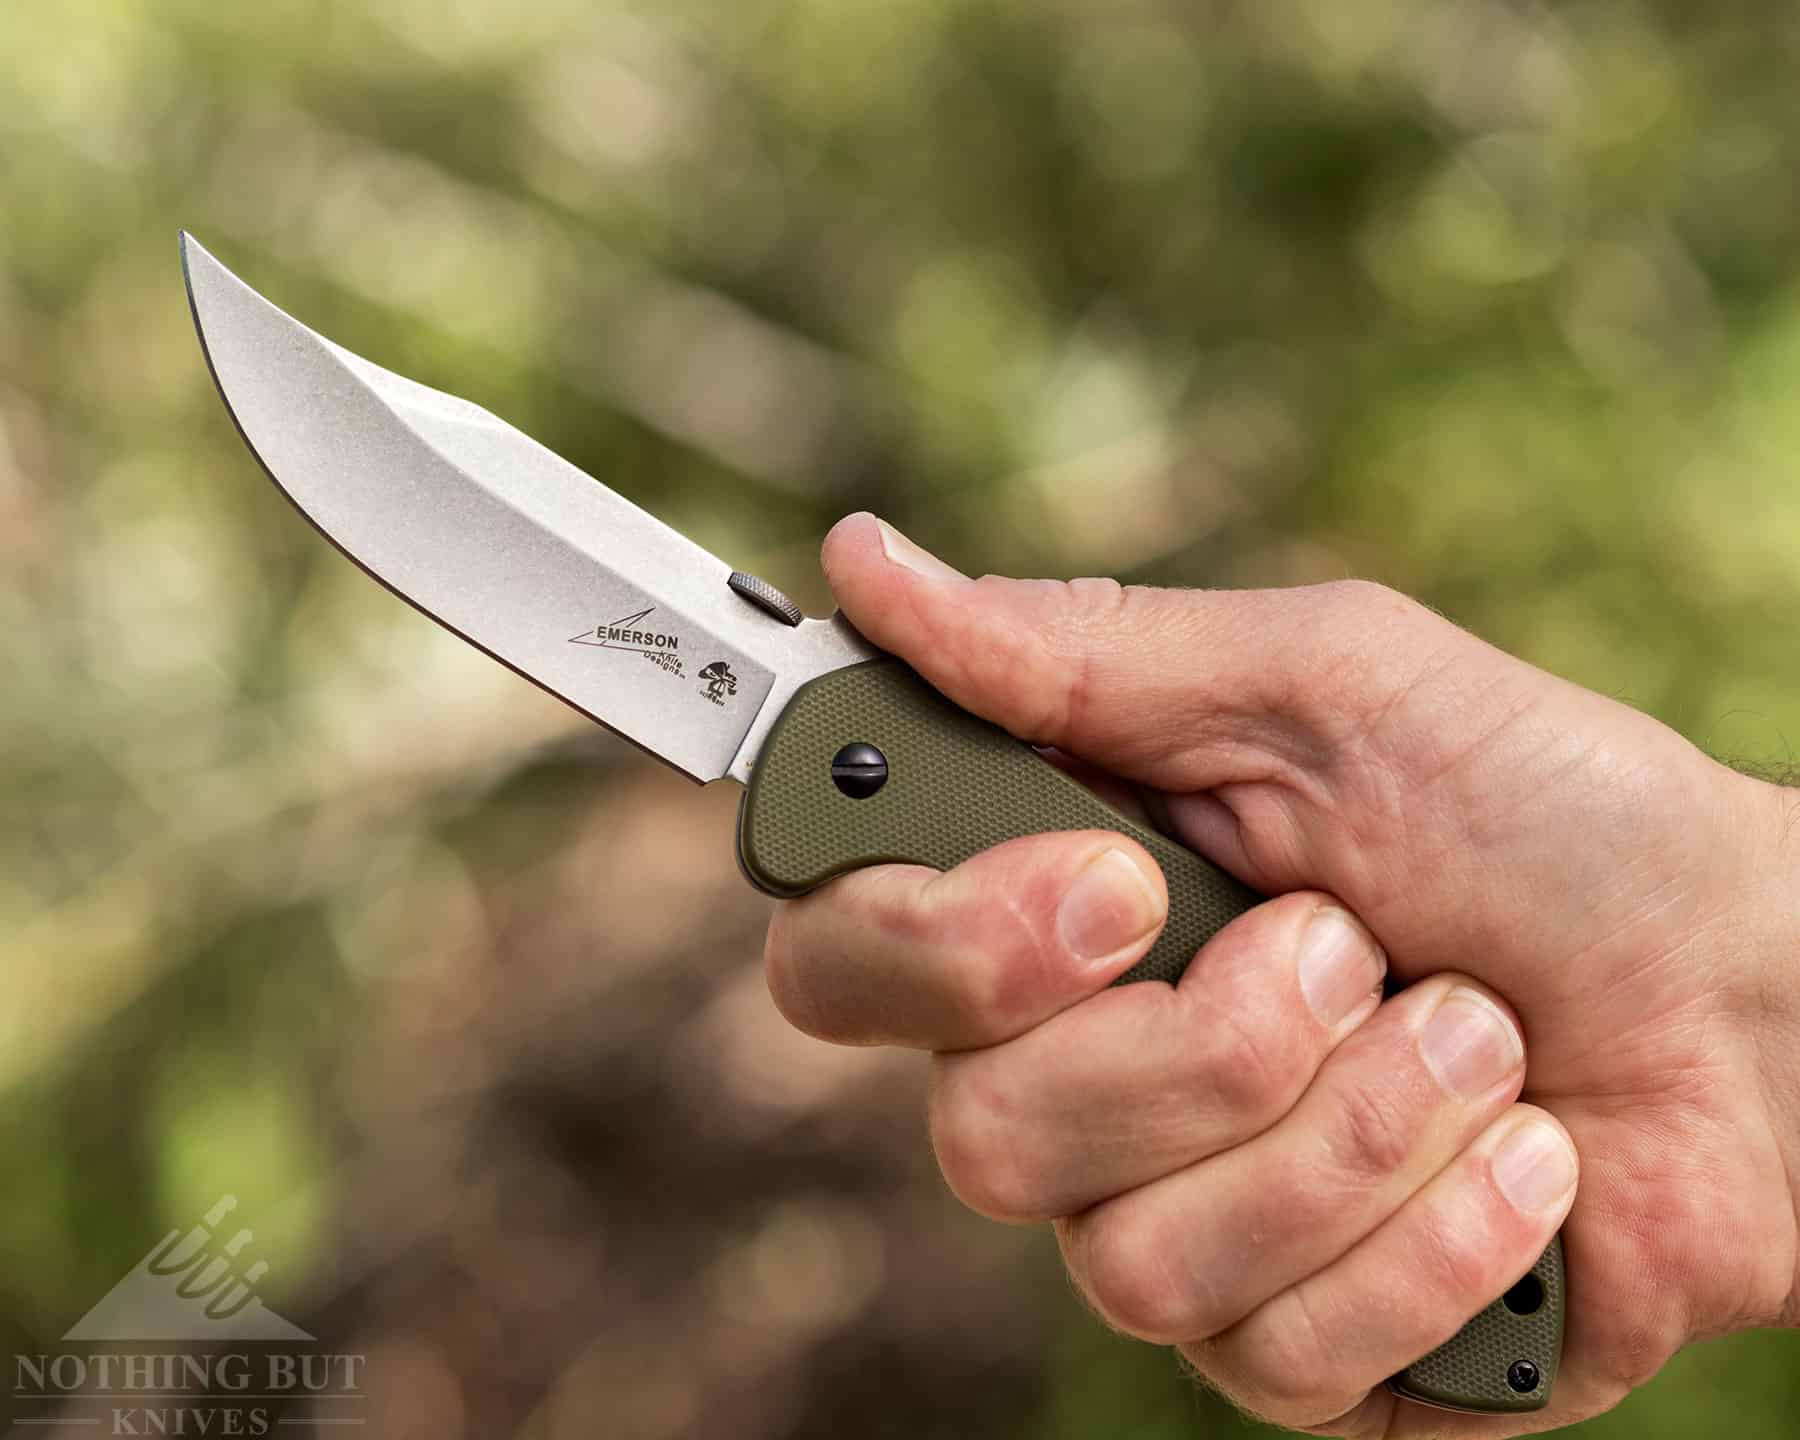 The handle of the Kershaw Emerson CQC 10K has a grippy handle that is easy to hold securely in tough situations.